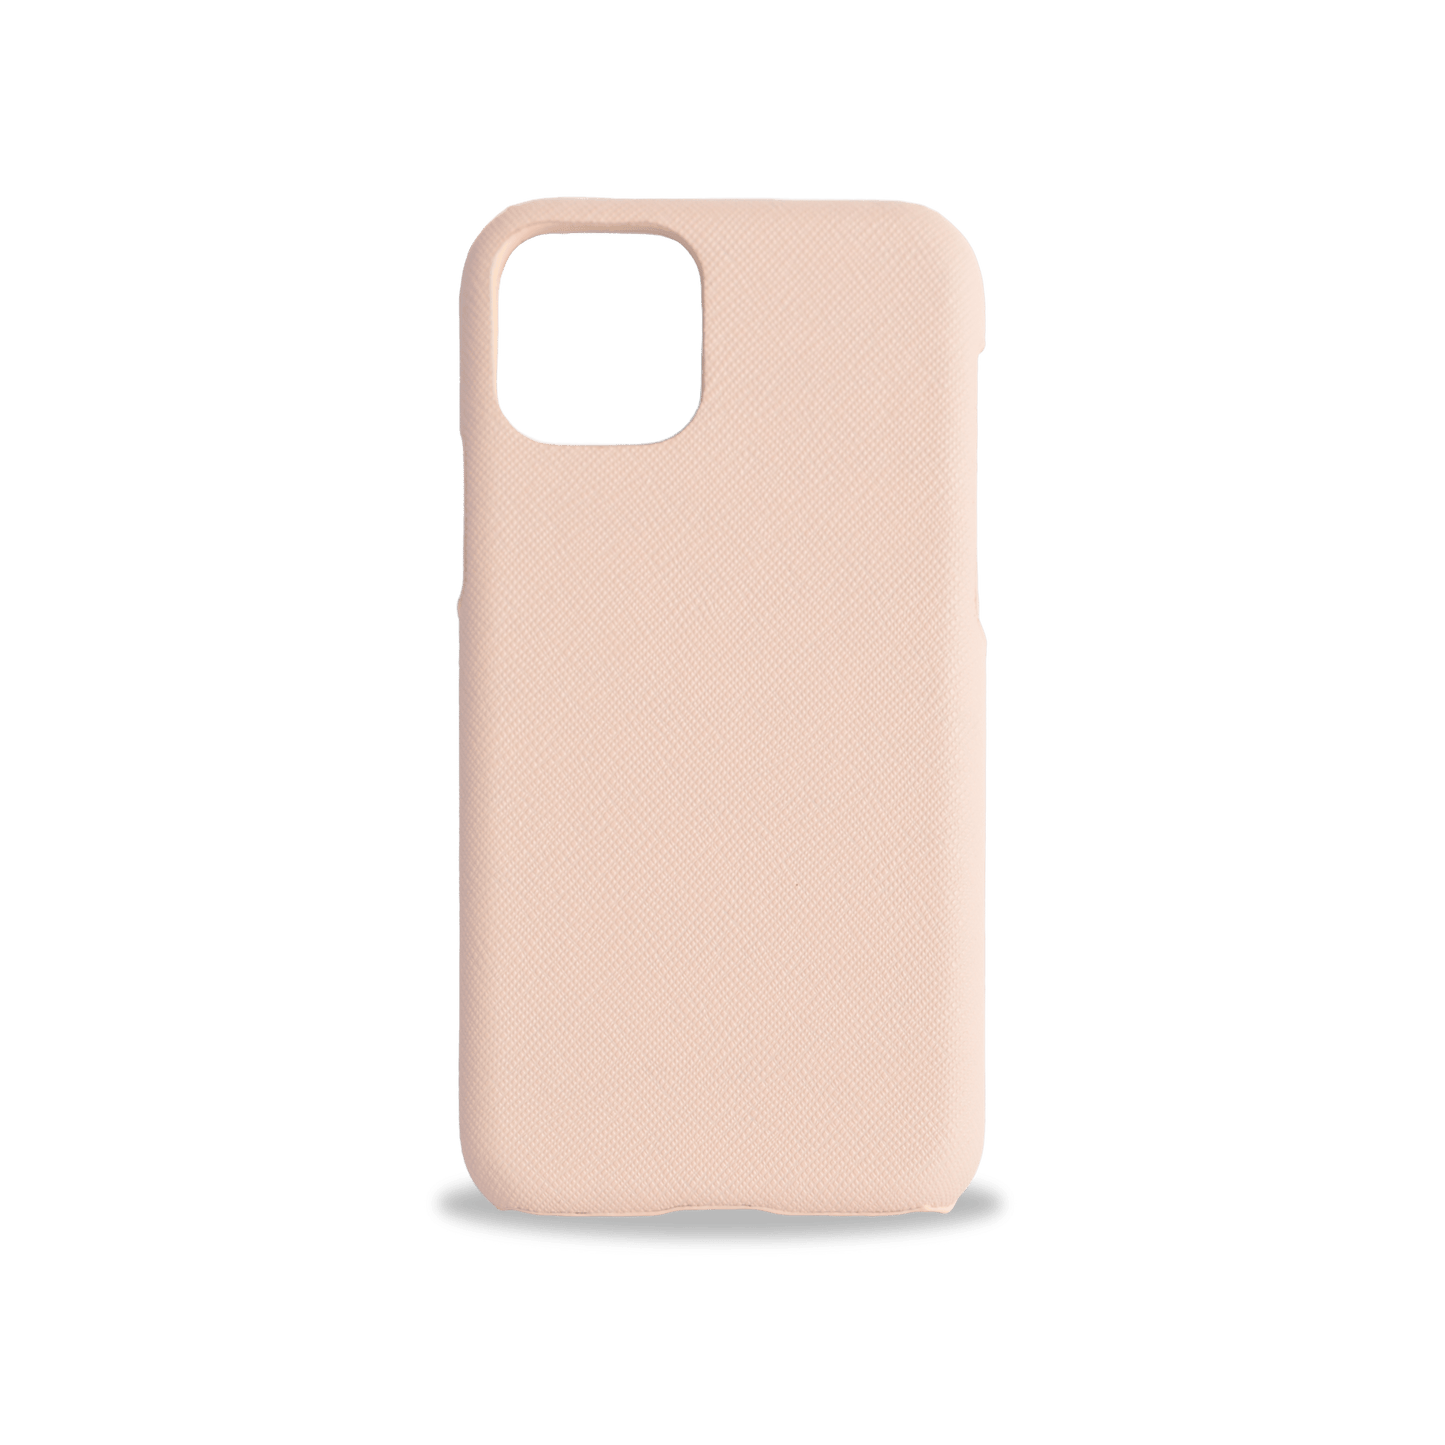 iPhone 11 Pro case Pink - Personal Press